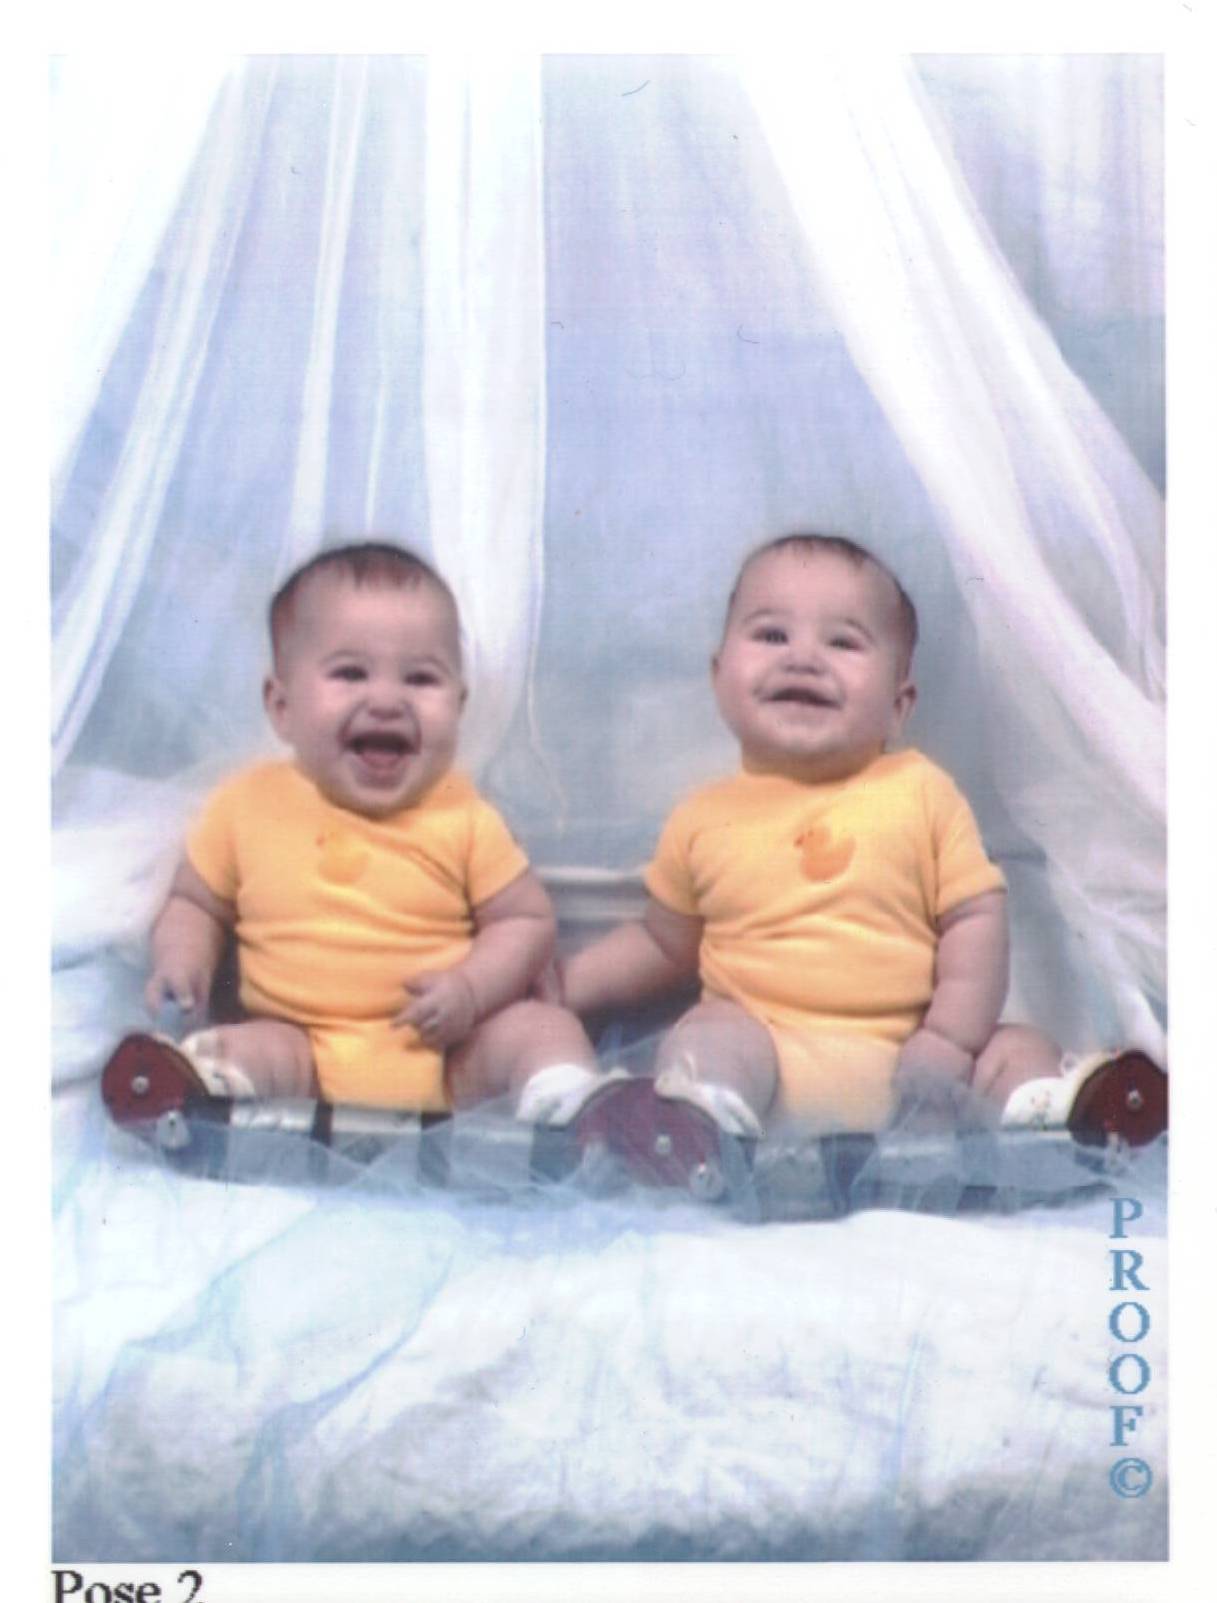 Jack on the left and John on the right at 6 months